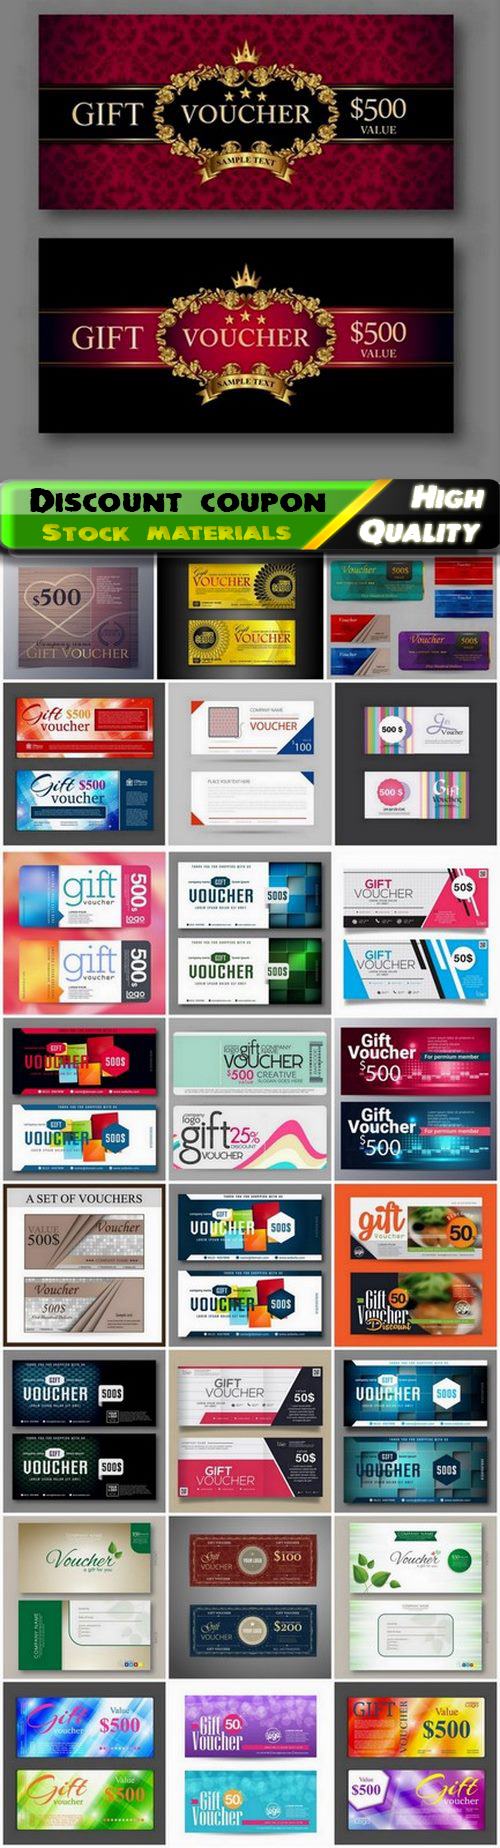 Discount coupon and gift voucher for business advertising 6 - 25 Eps